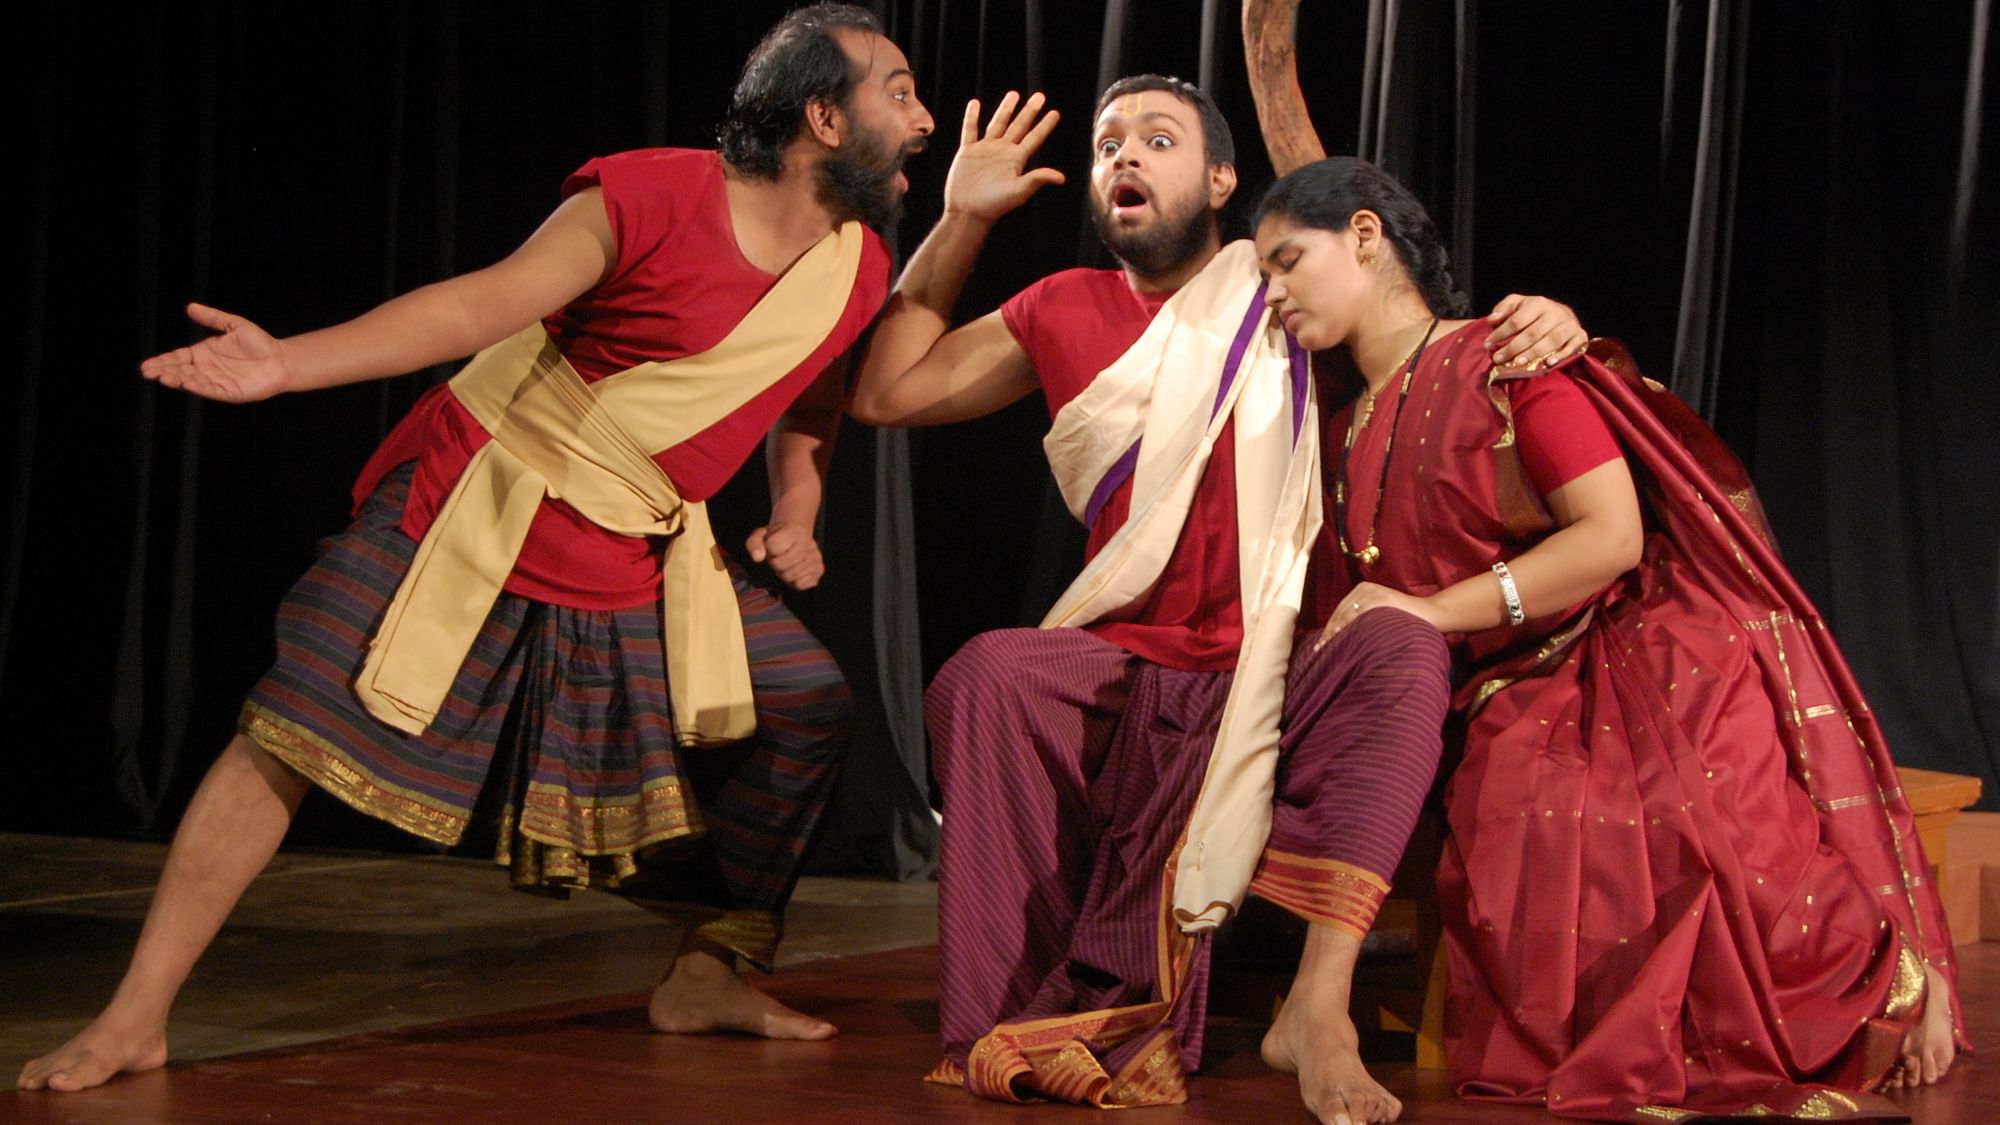 This little village group could give Delhi’s acting schools a run for their money! (Photo Courtesy: Ninasam)